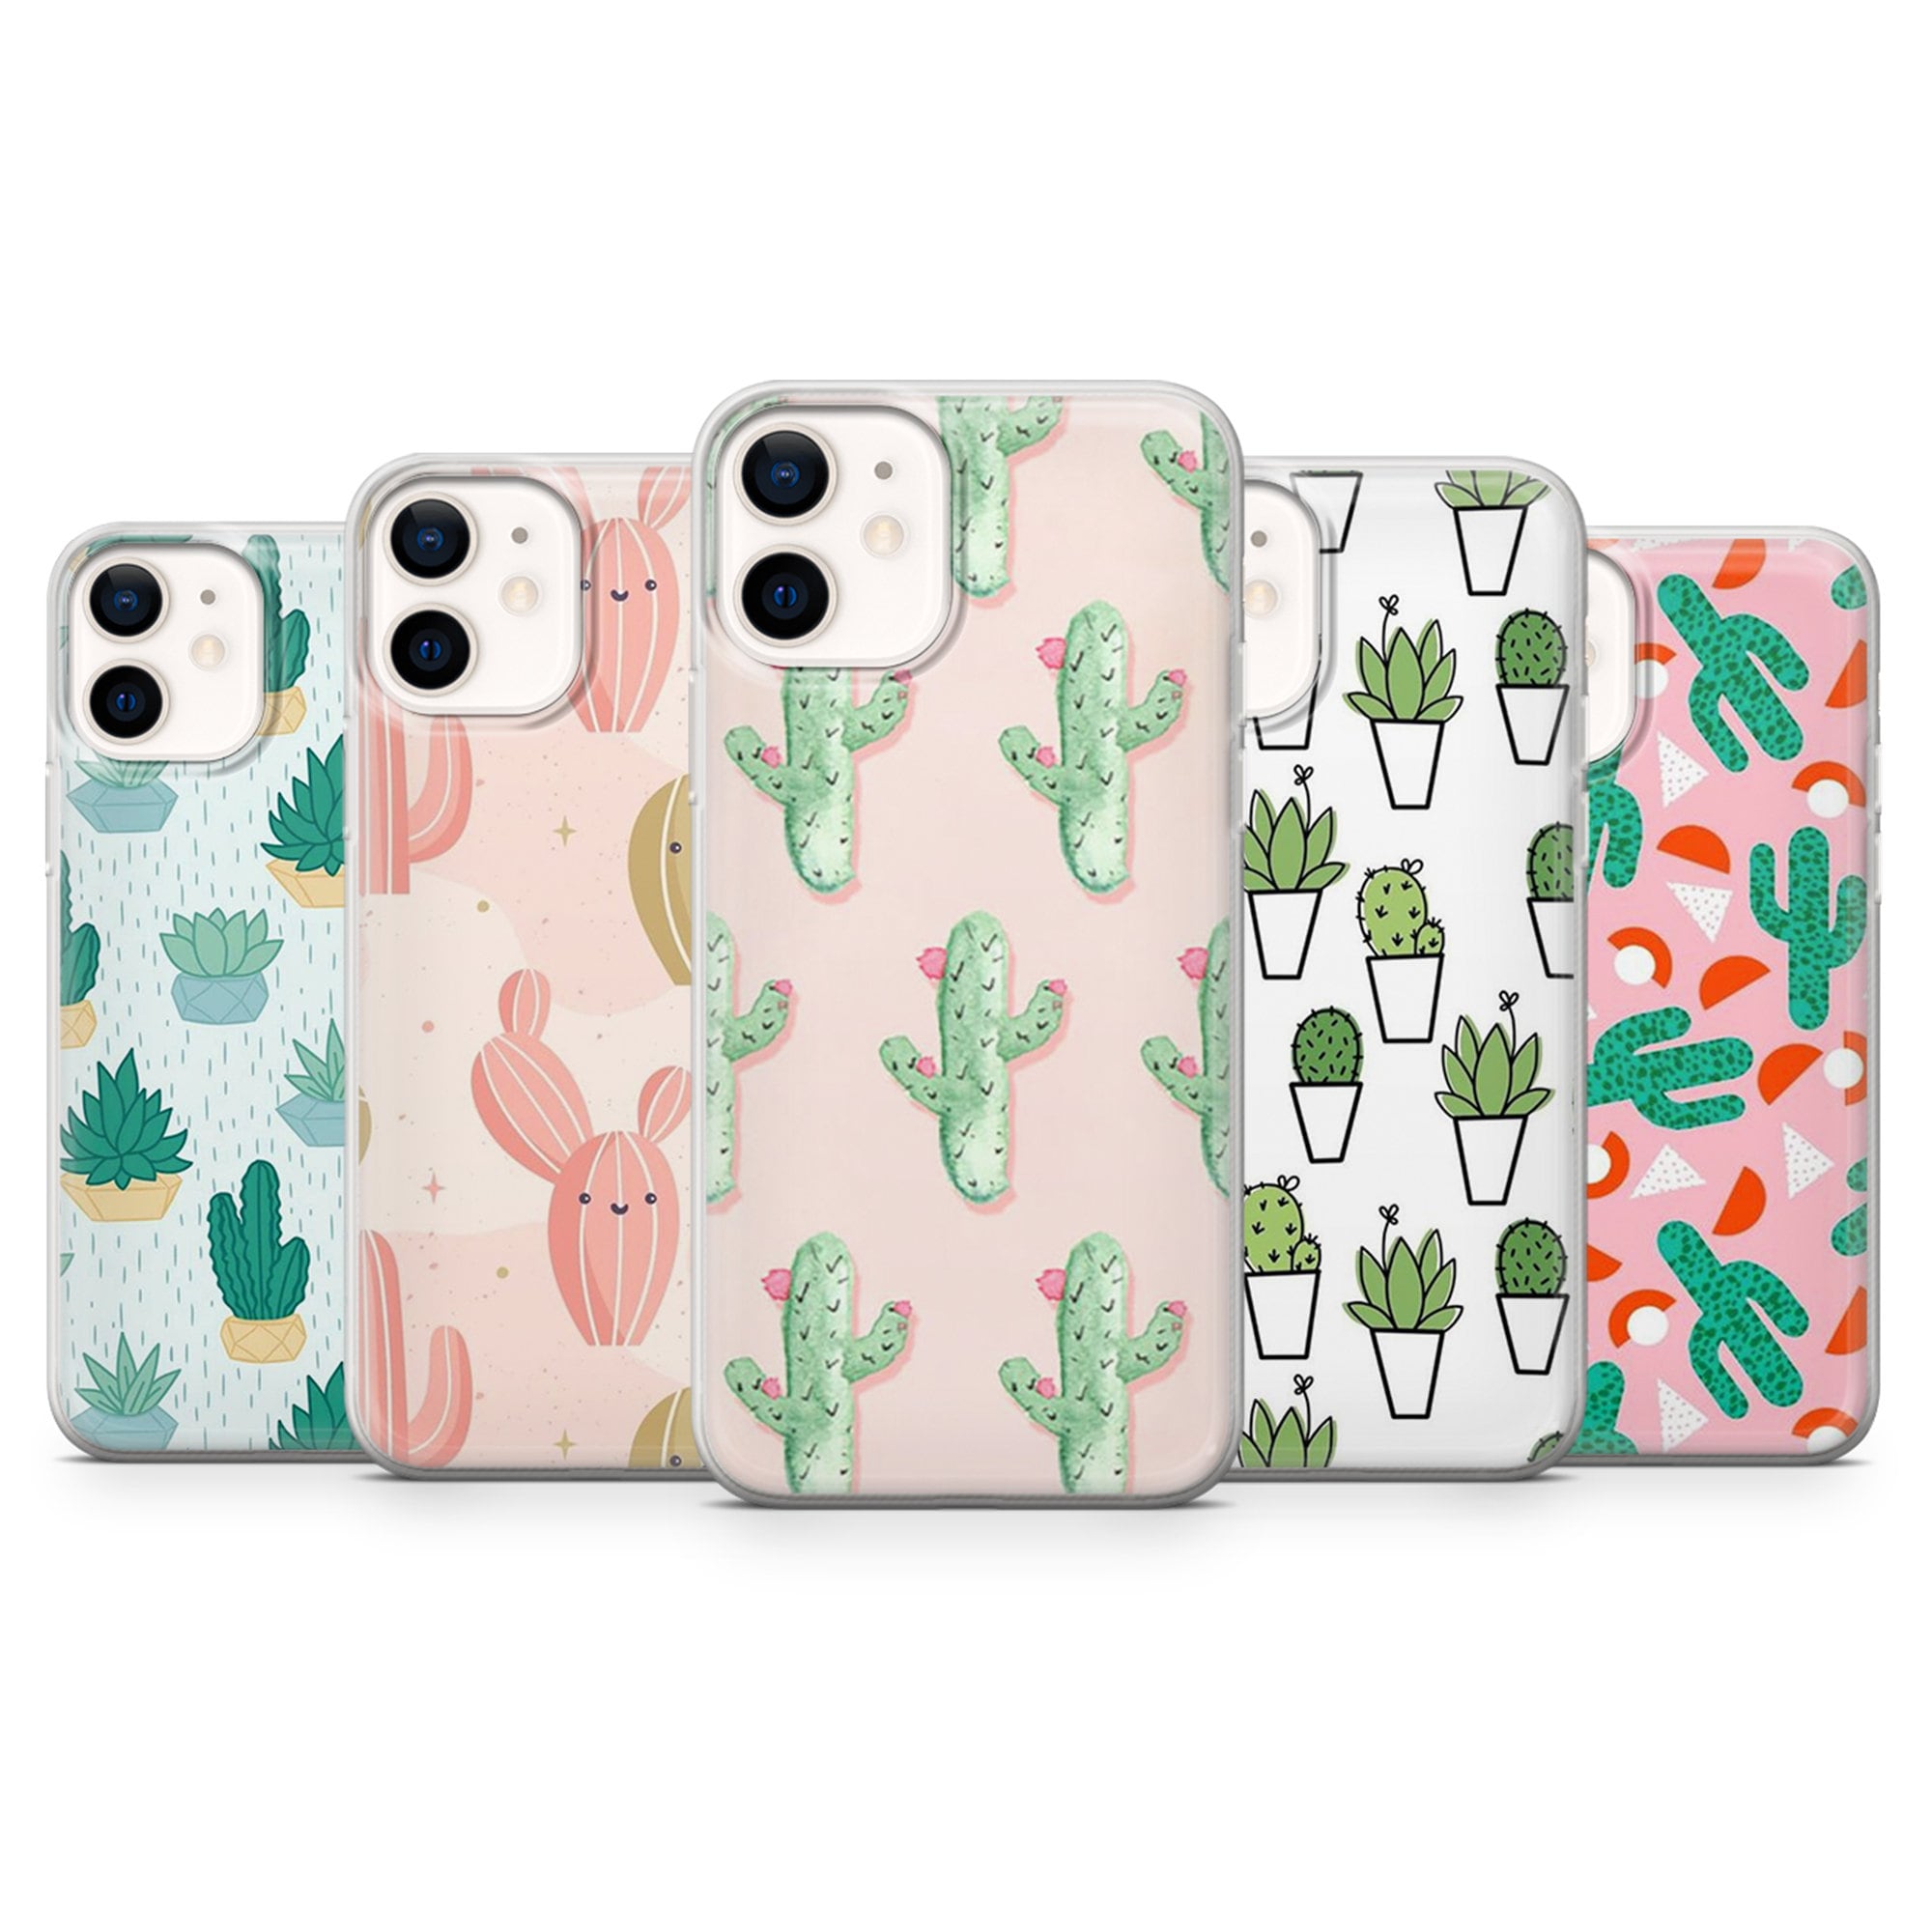  CASETERNITY TPU Case Cover Compatible with iPhone 12 6.1 Inch  Slim Fit Cover iPhone 12 Cactus Travis : Cell Phones & Accessories